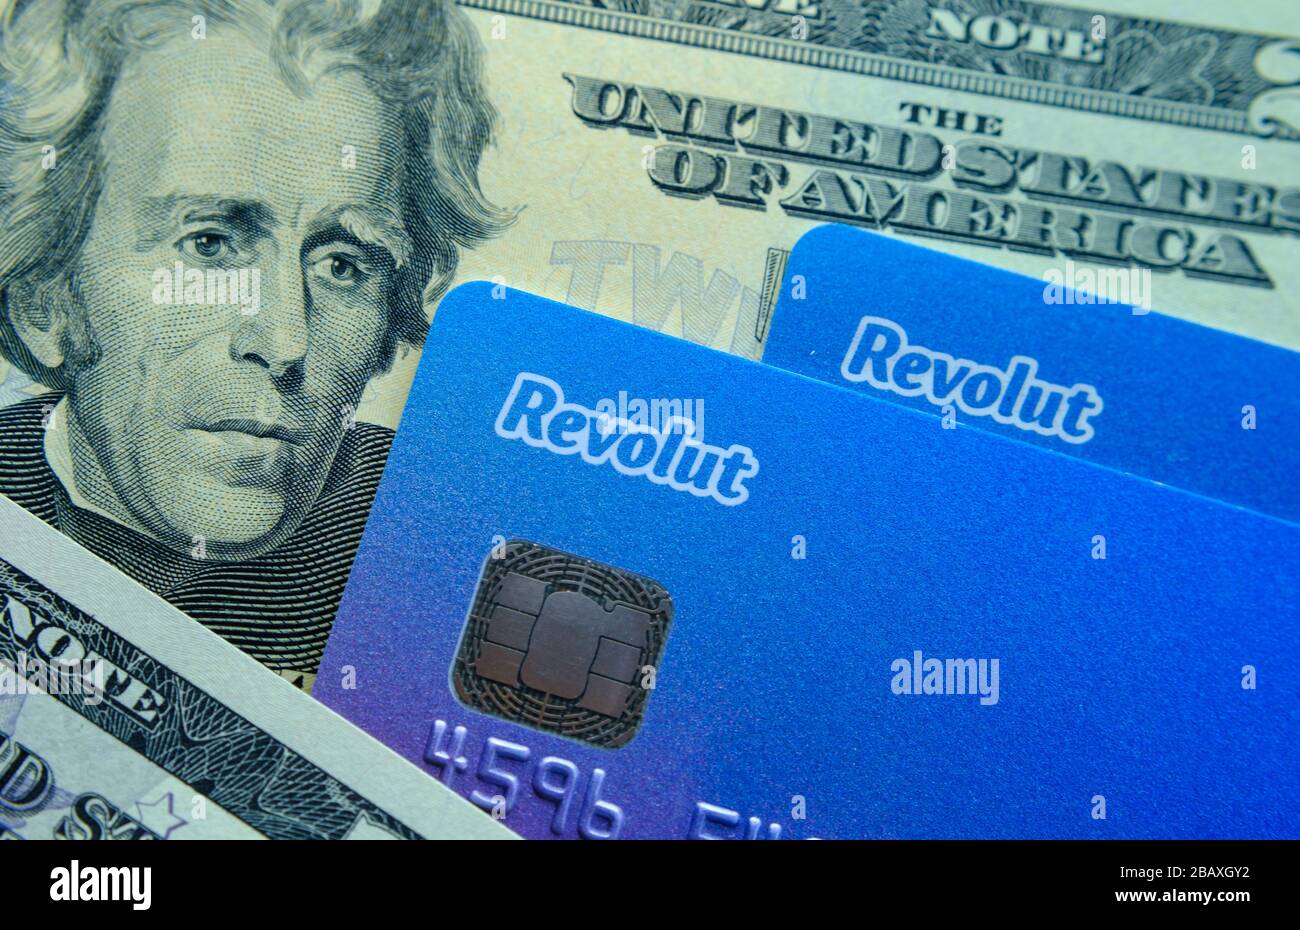 Stone / United Kingdom - March 29 2020: Revolut cards placed on top of dollar notes. Concept photo for revolut bank expansion to American market. Stock Photo